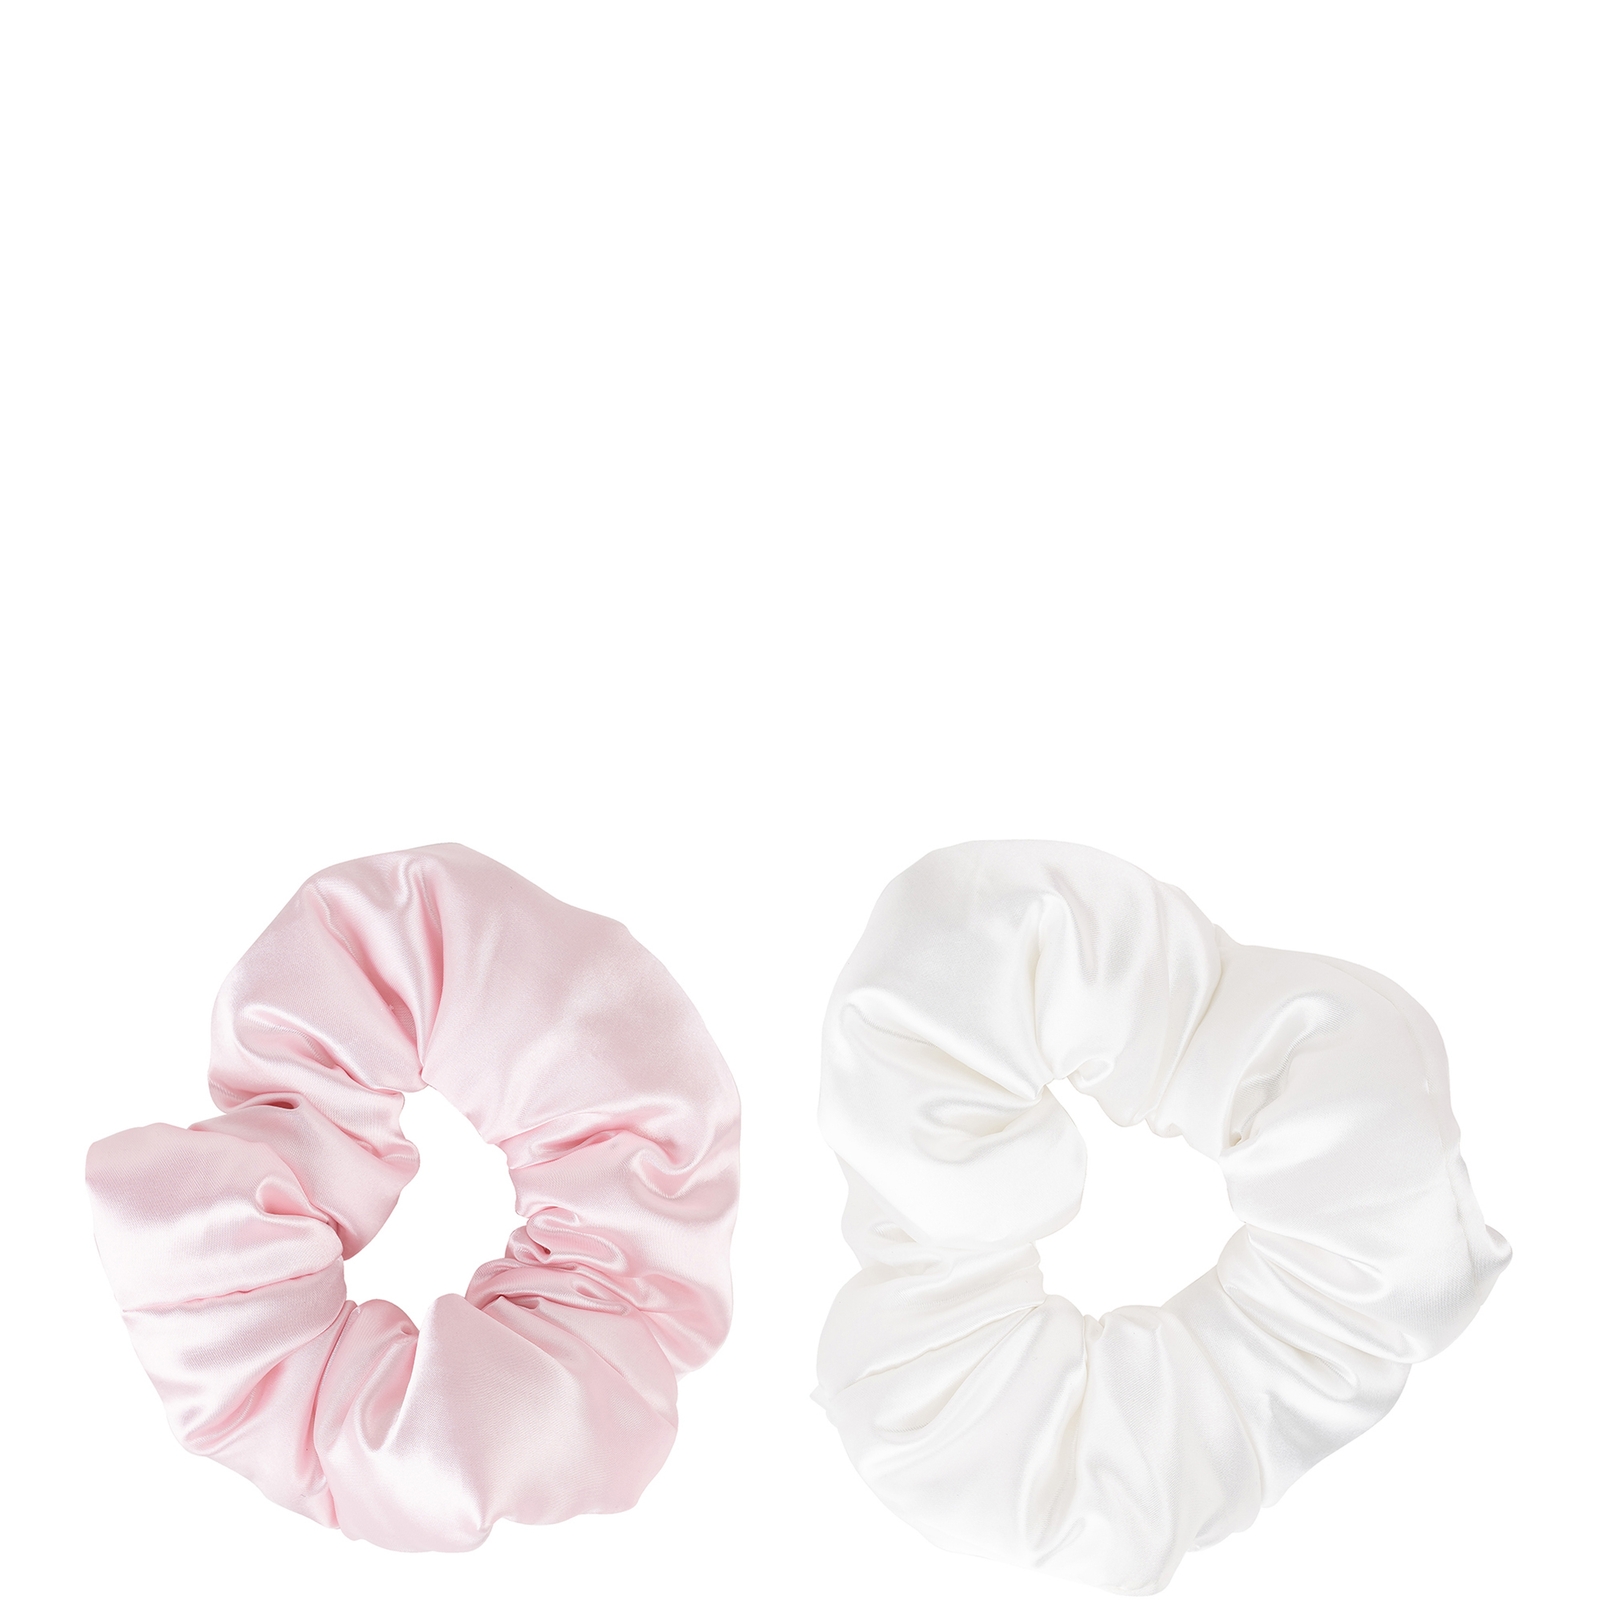 Image of brushworks Large Cloud Scrunchies 2 Pack - Pink and White